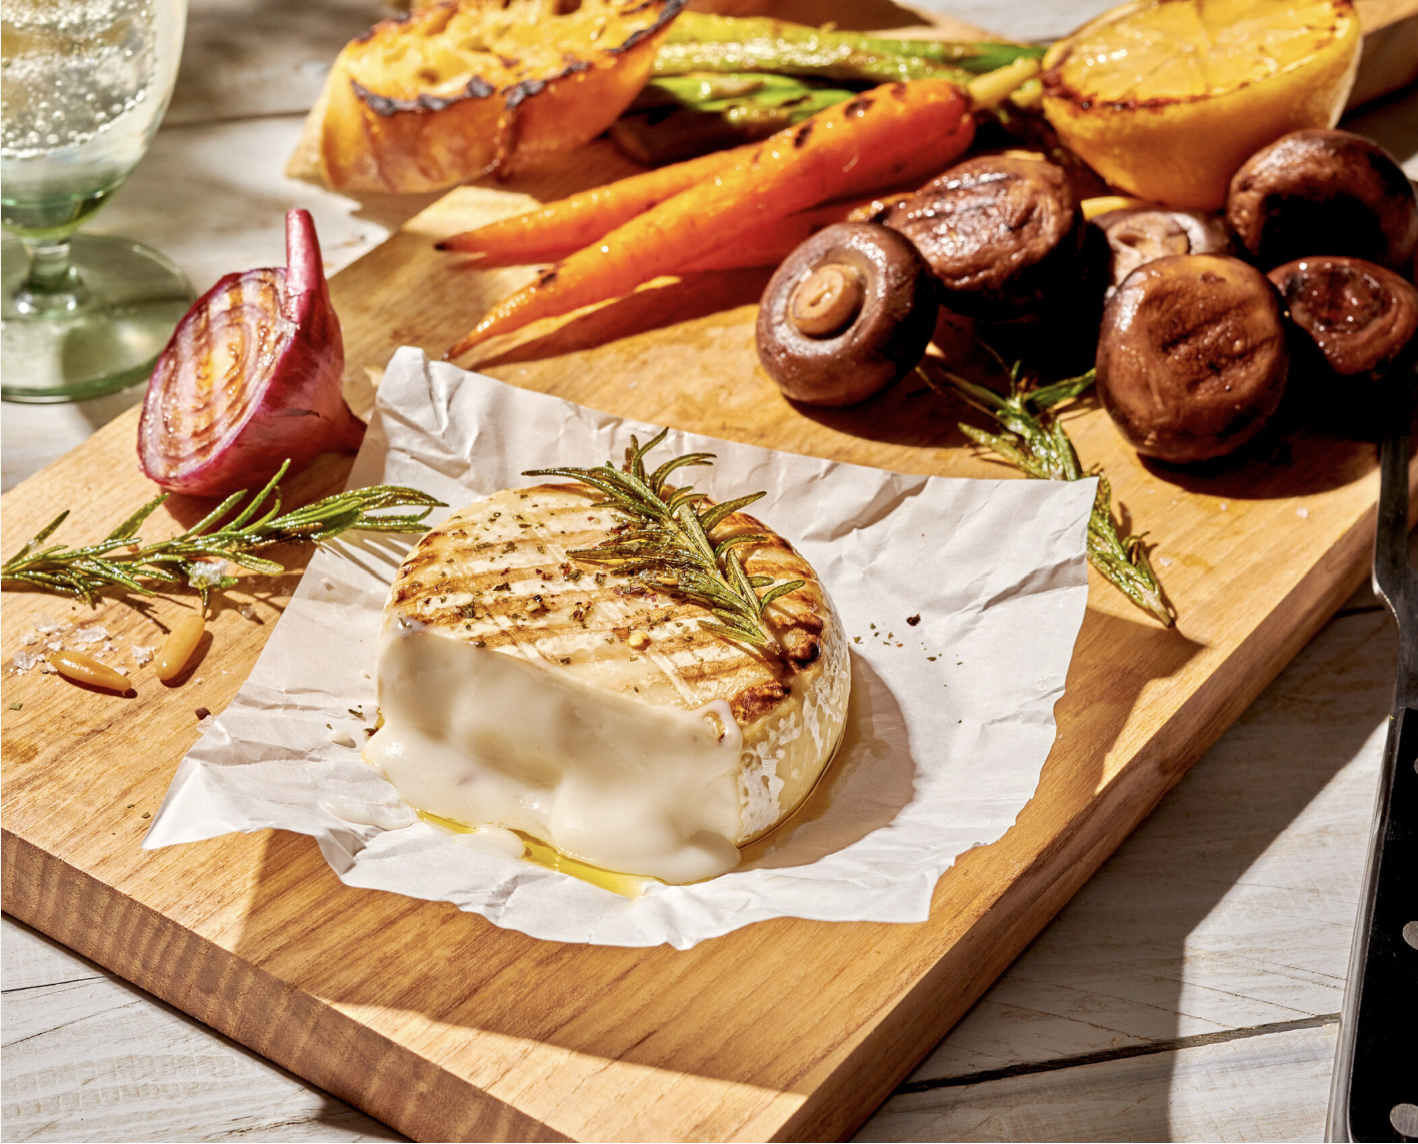 Mondarella Grill Blanc Food innovation for summer parties: Modeled on French soft cheese, this new development goes on the grill instead of on the cold cheese plate. Perfect with grilled vegetables or fresh salad.
100% plant-based and made from natural ingredients.